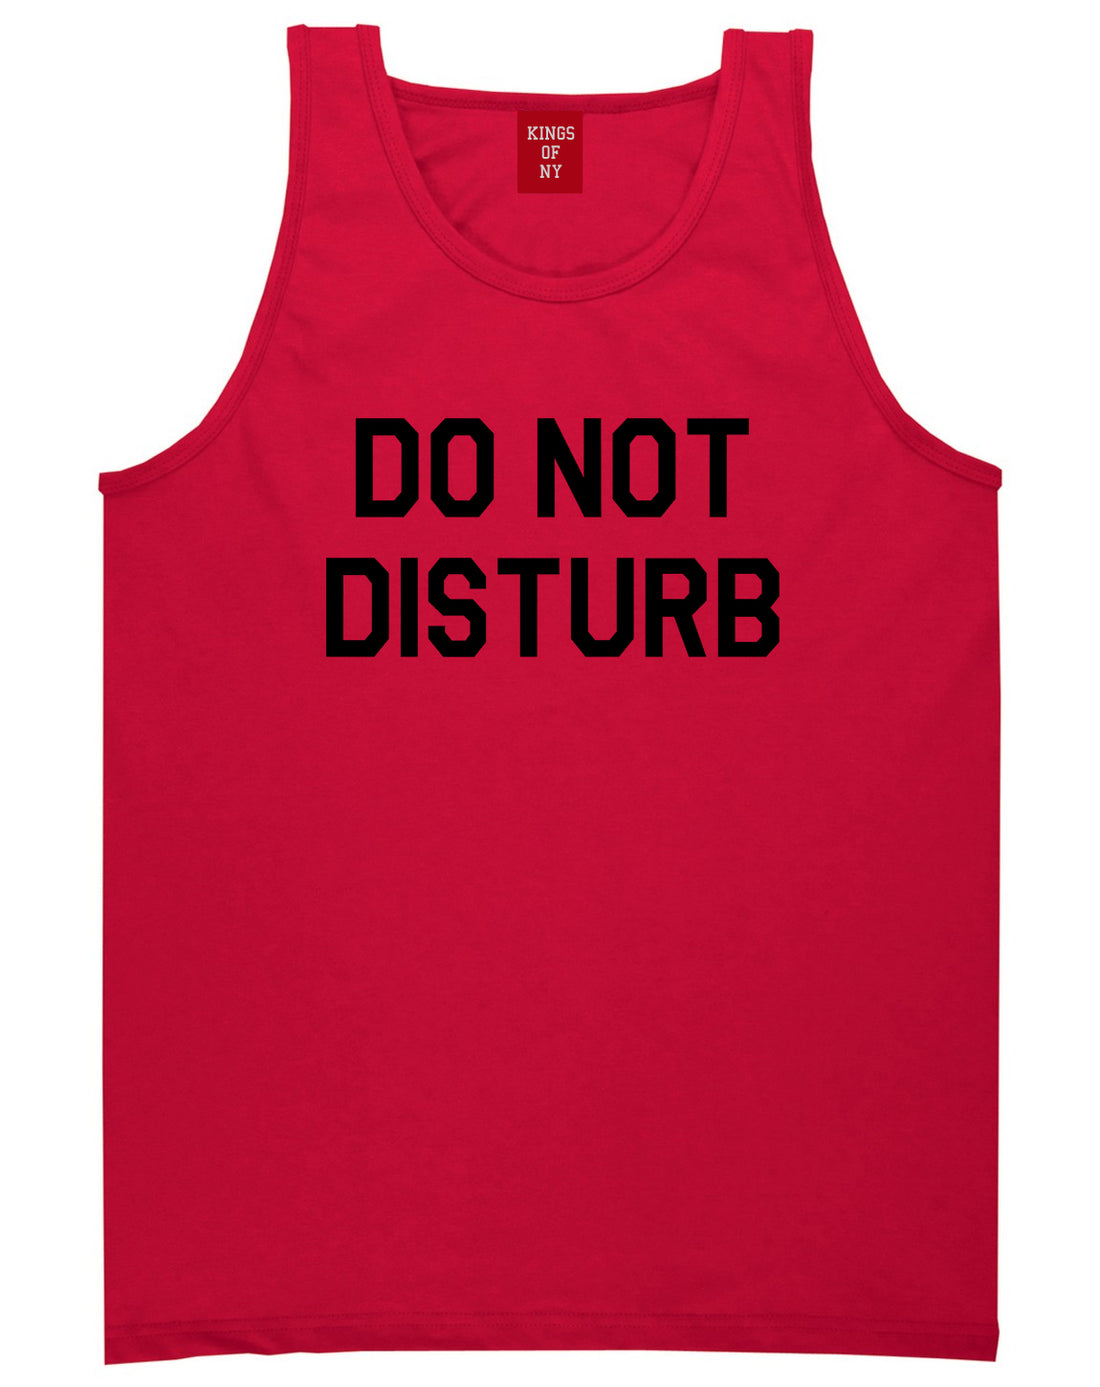 Do_Not_Disturb Mens Red Tank Top Shirt by Kings Of NY